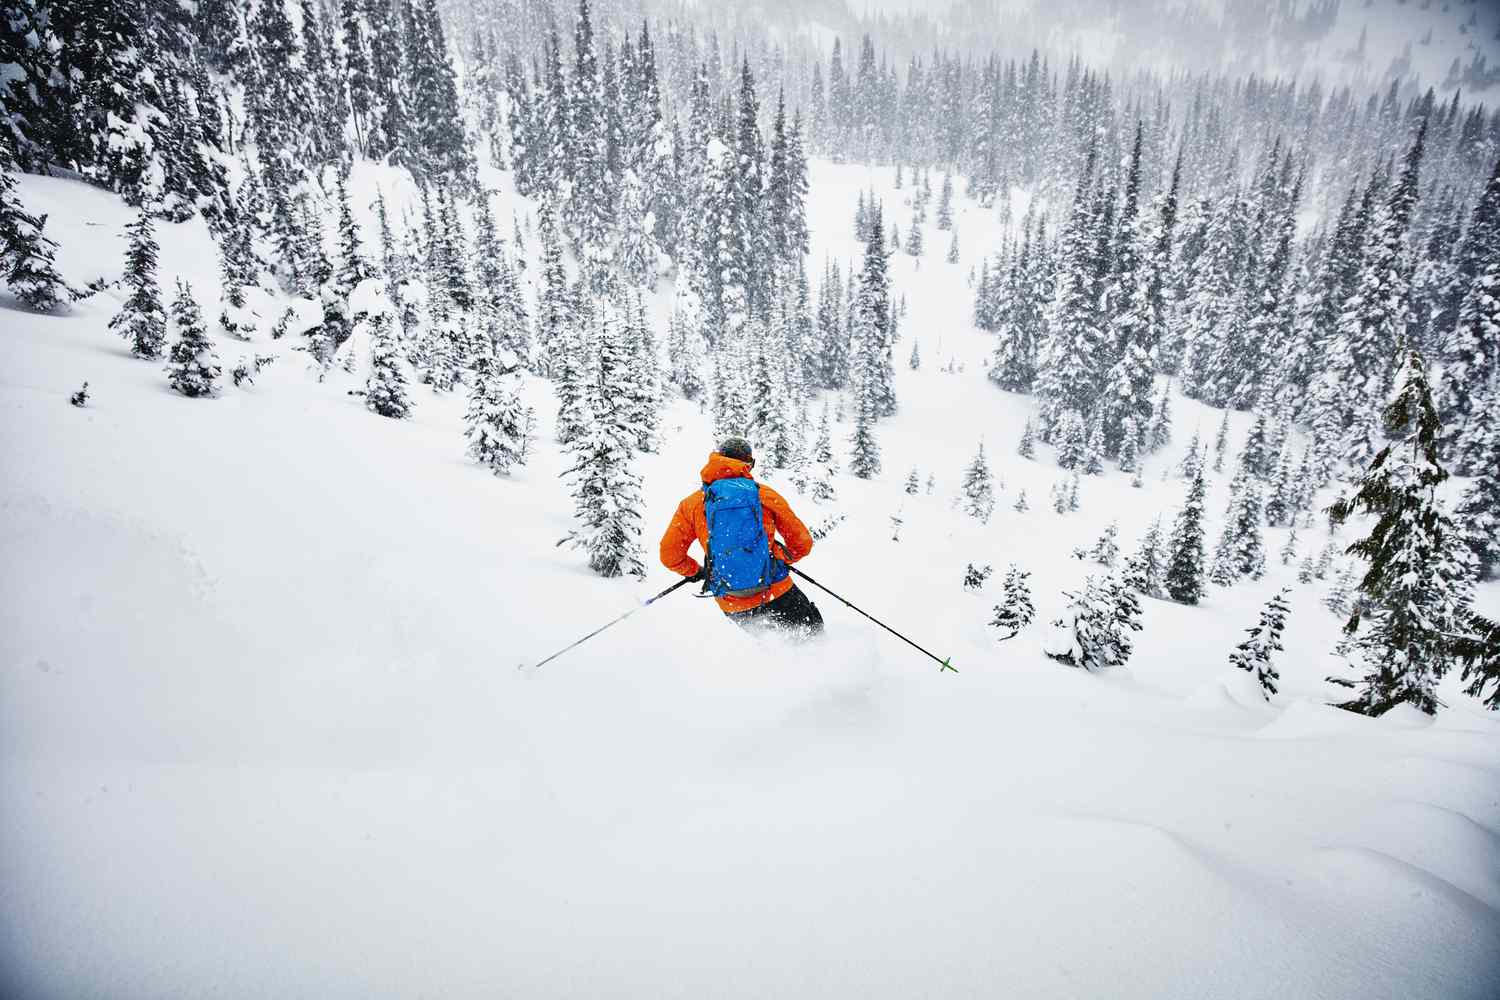 The Top 25 Skiing and Snowboarding Locations in the U.S.